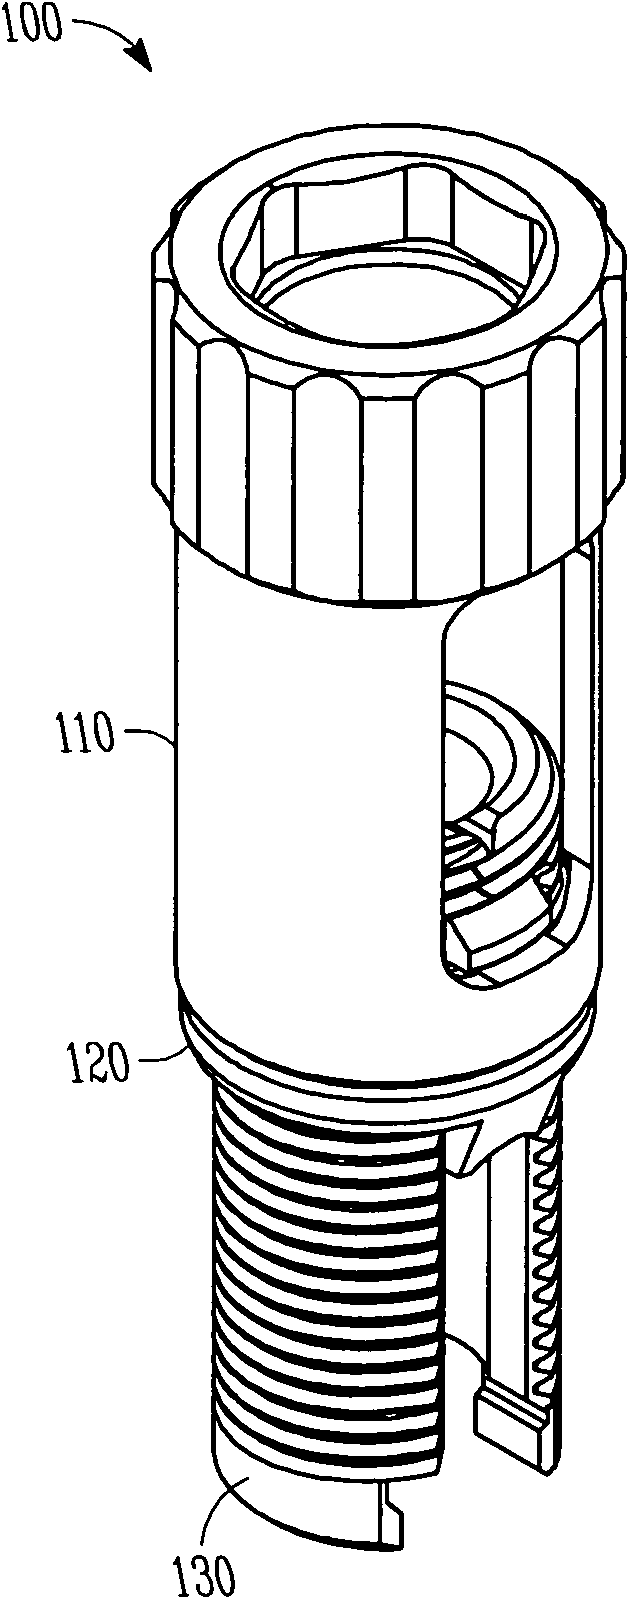 Rod reducer apparatus for spinal corrective surgery